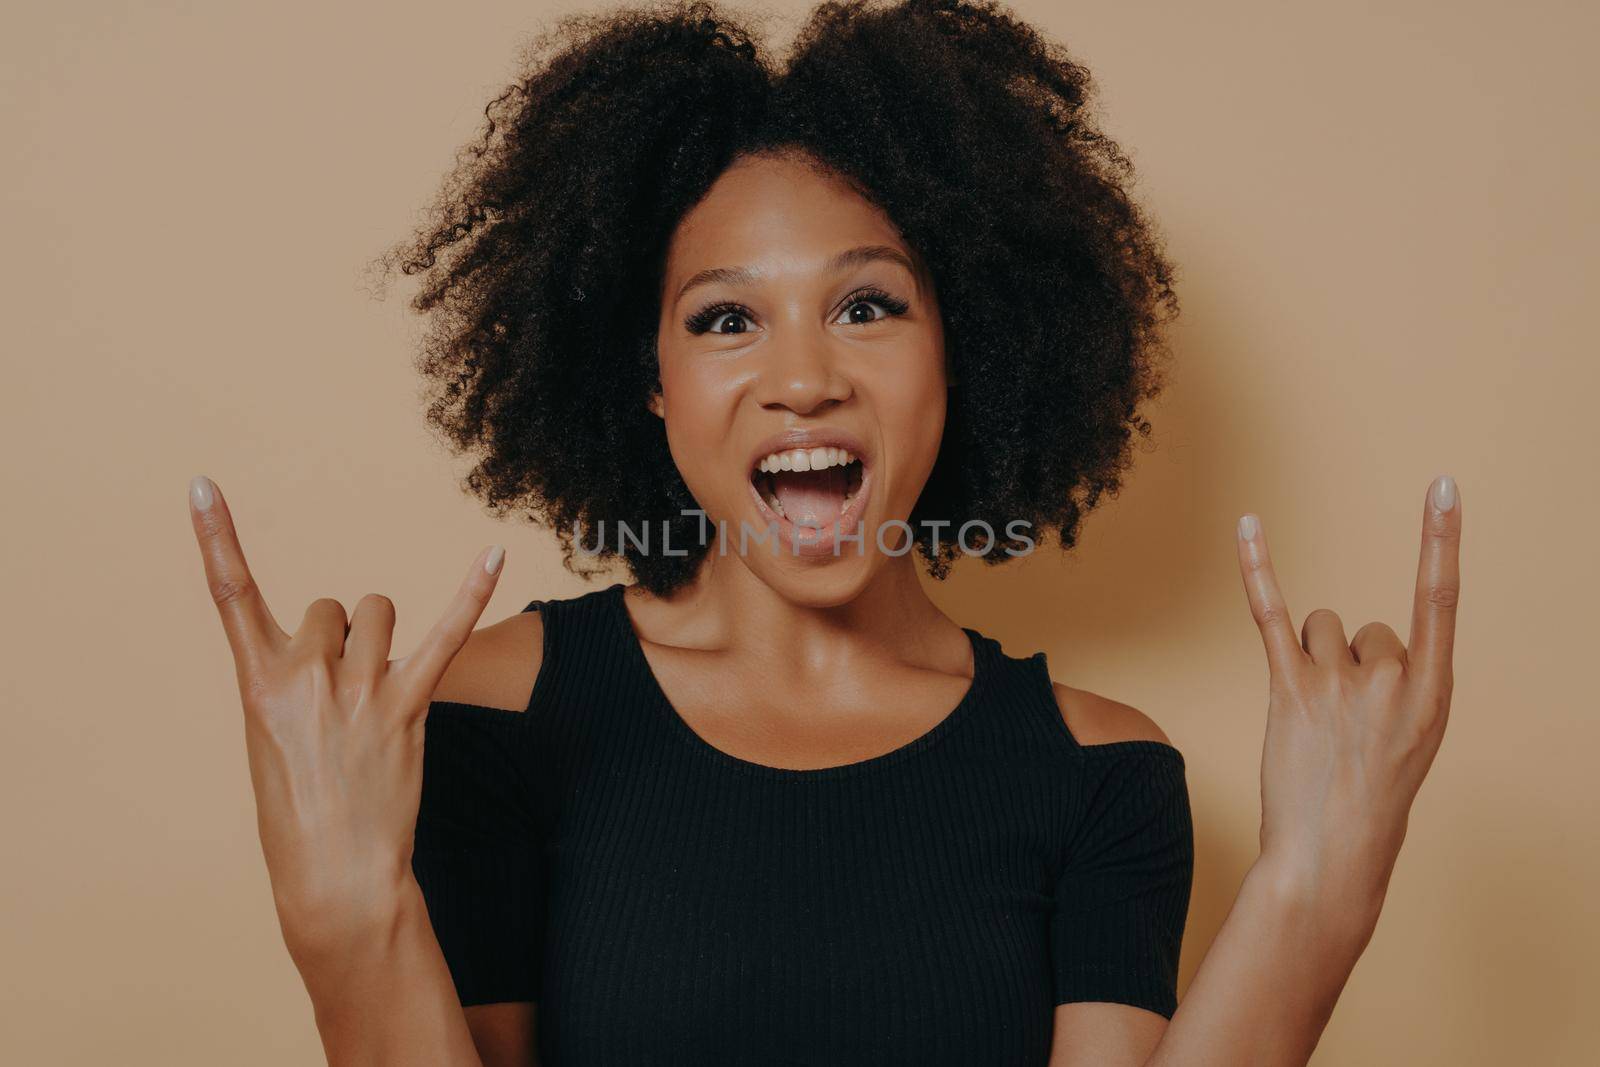 Young african american woman wearing black tshirt shouting with crazy facial expression doing rock-n-roll symbol with hands up like music star, isolated over beige studio background with copy space